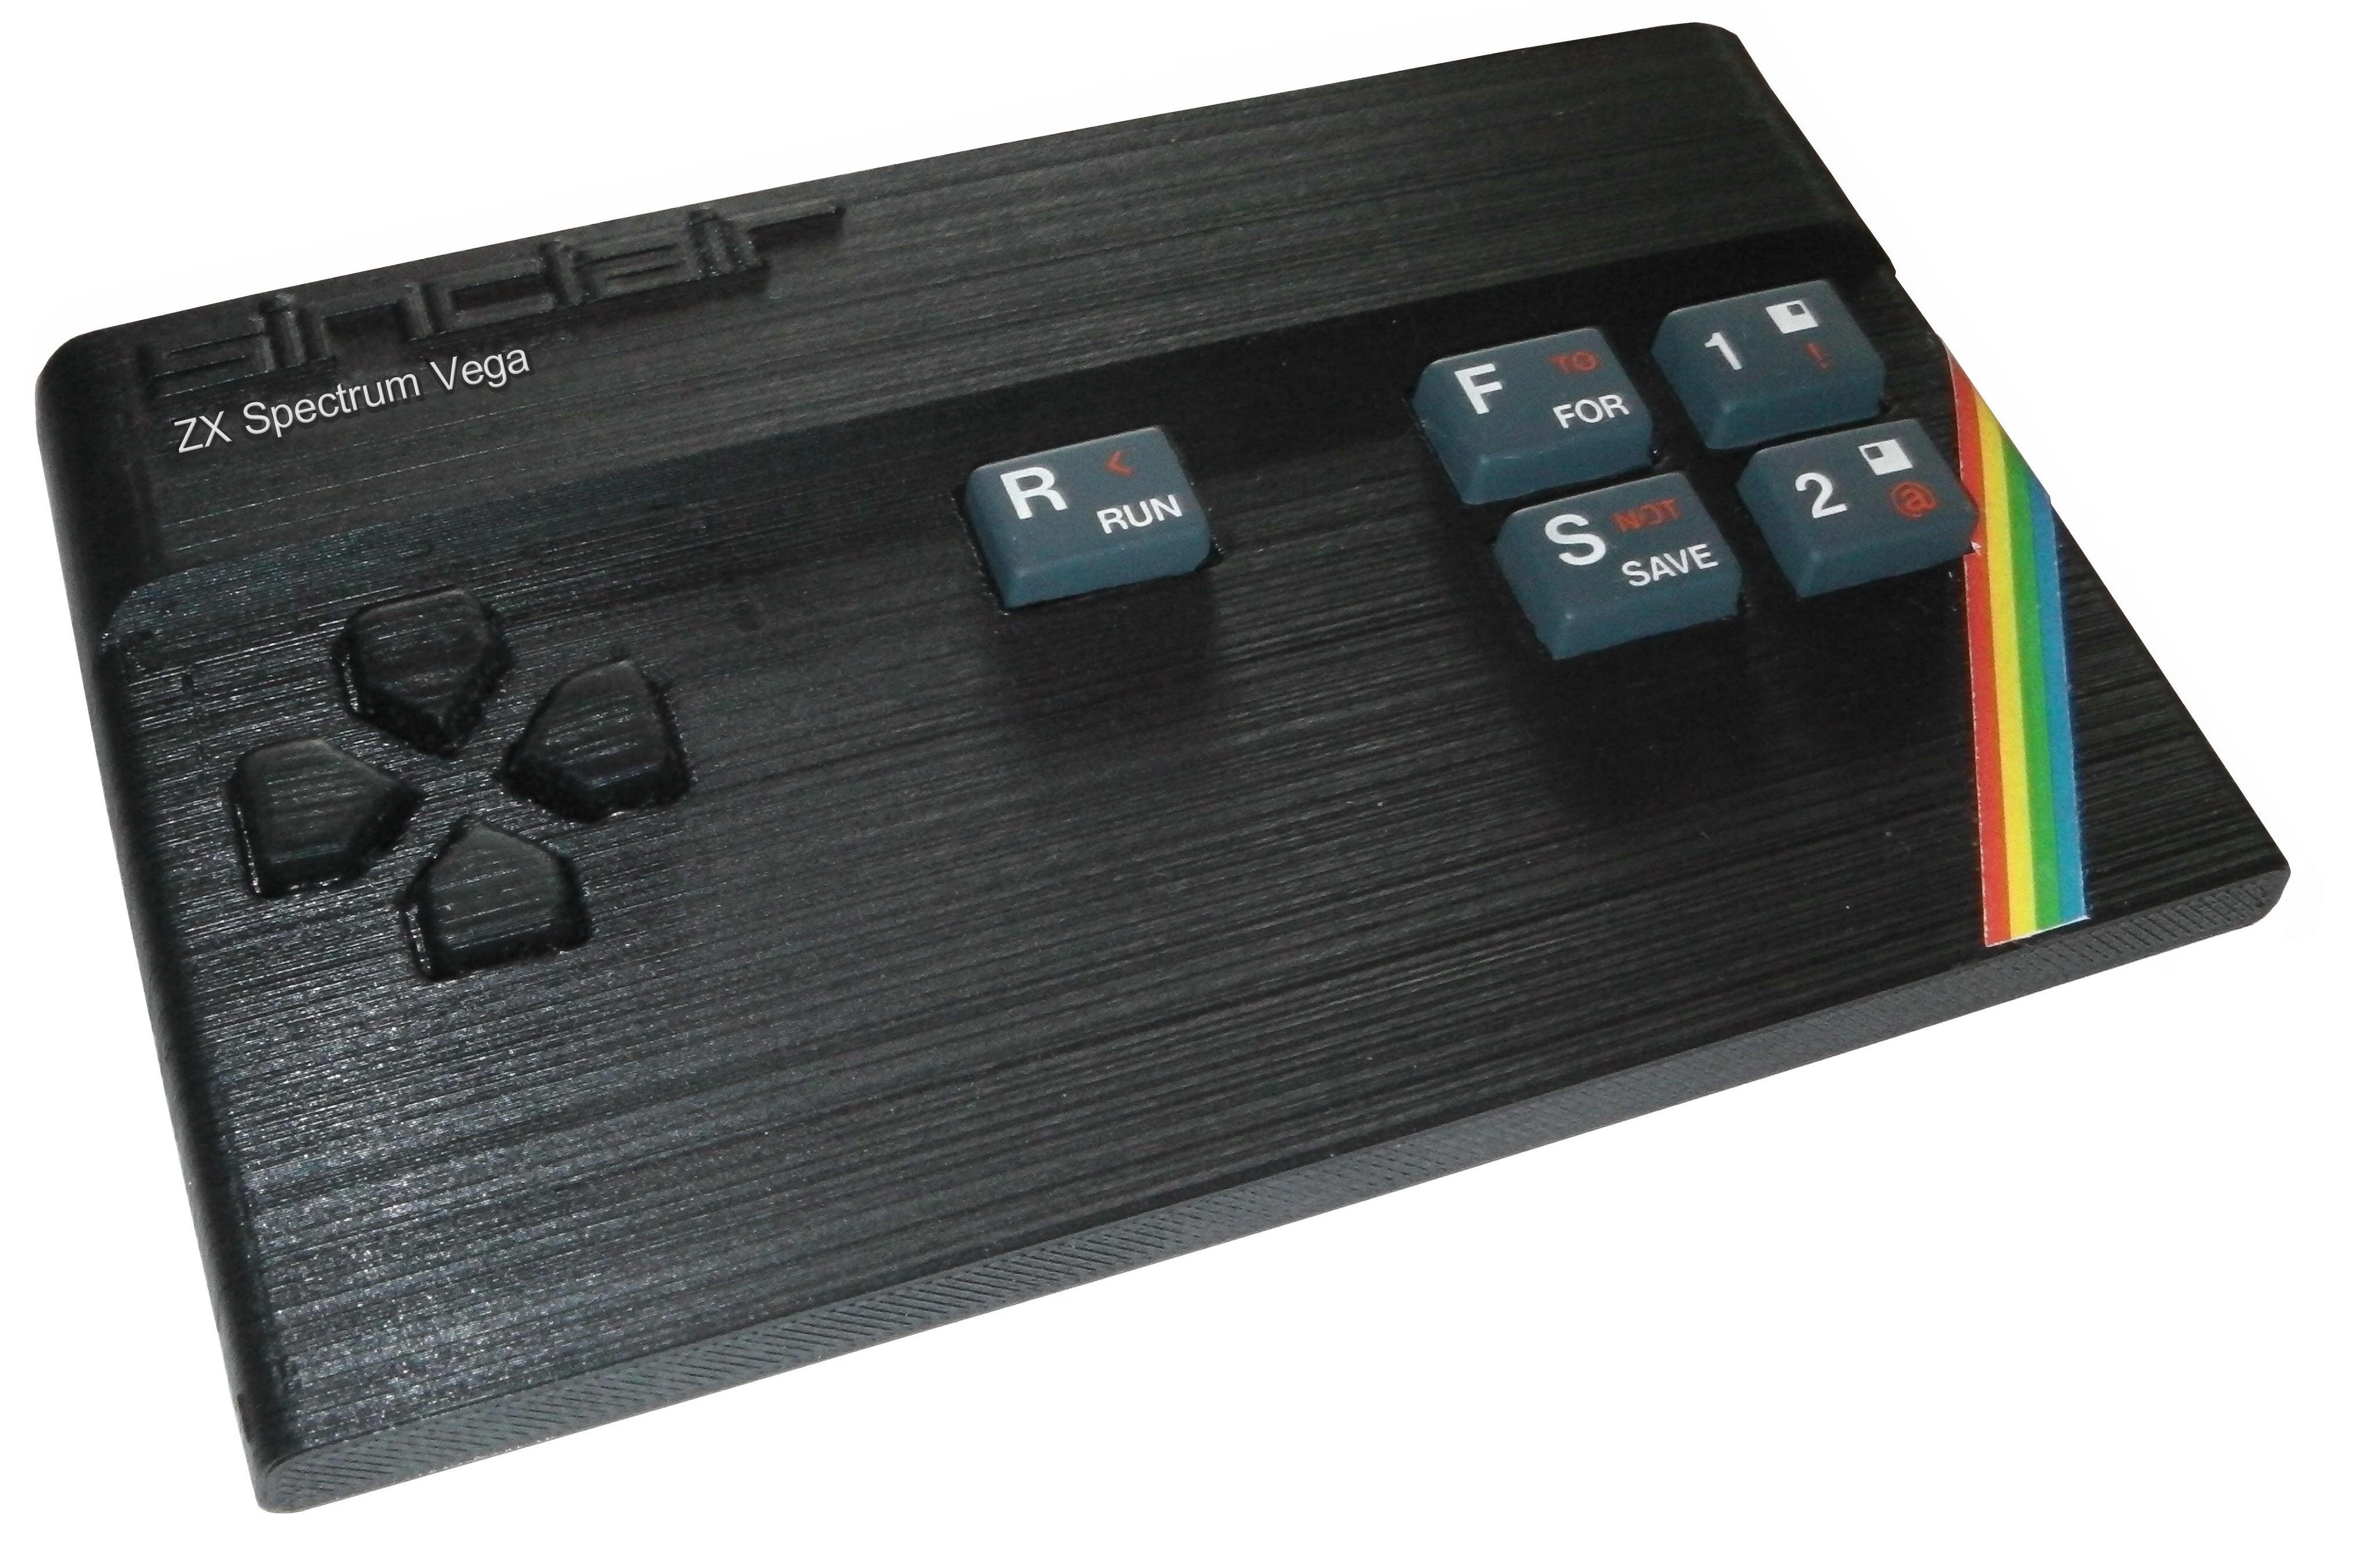 Sir Clive Sinclair crowdfunding new ZX Spectrum computer 